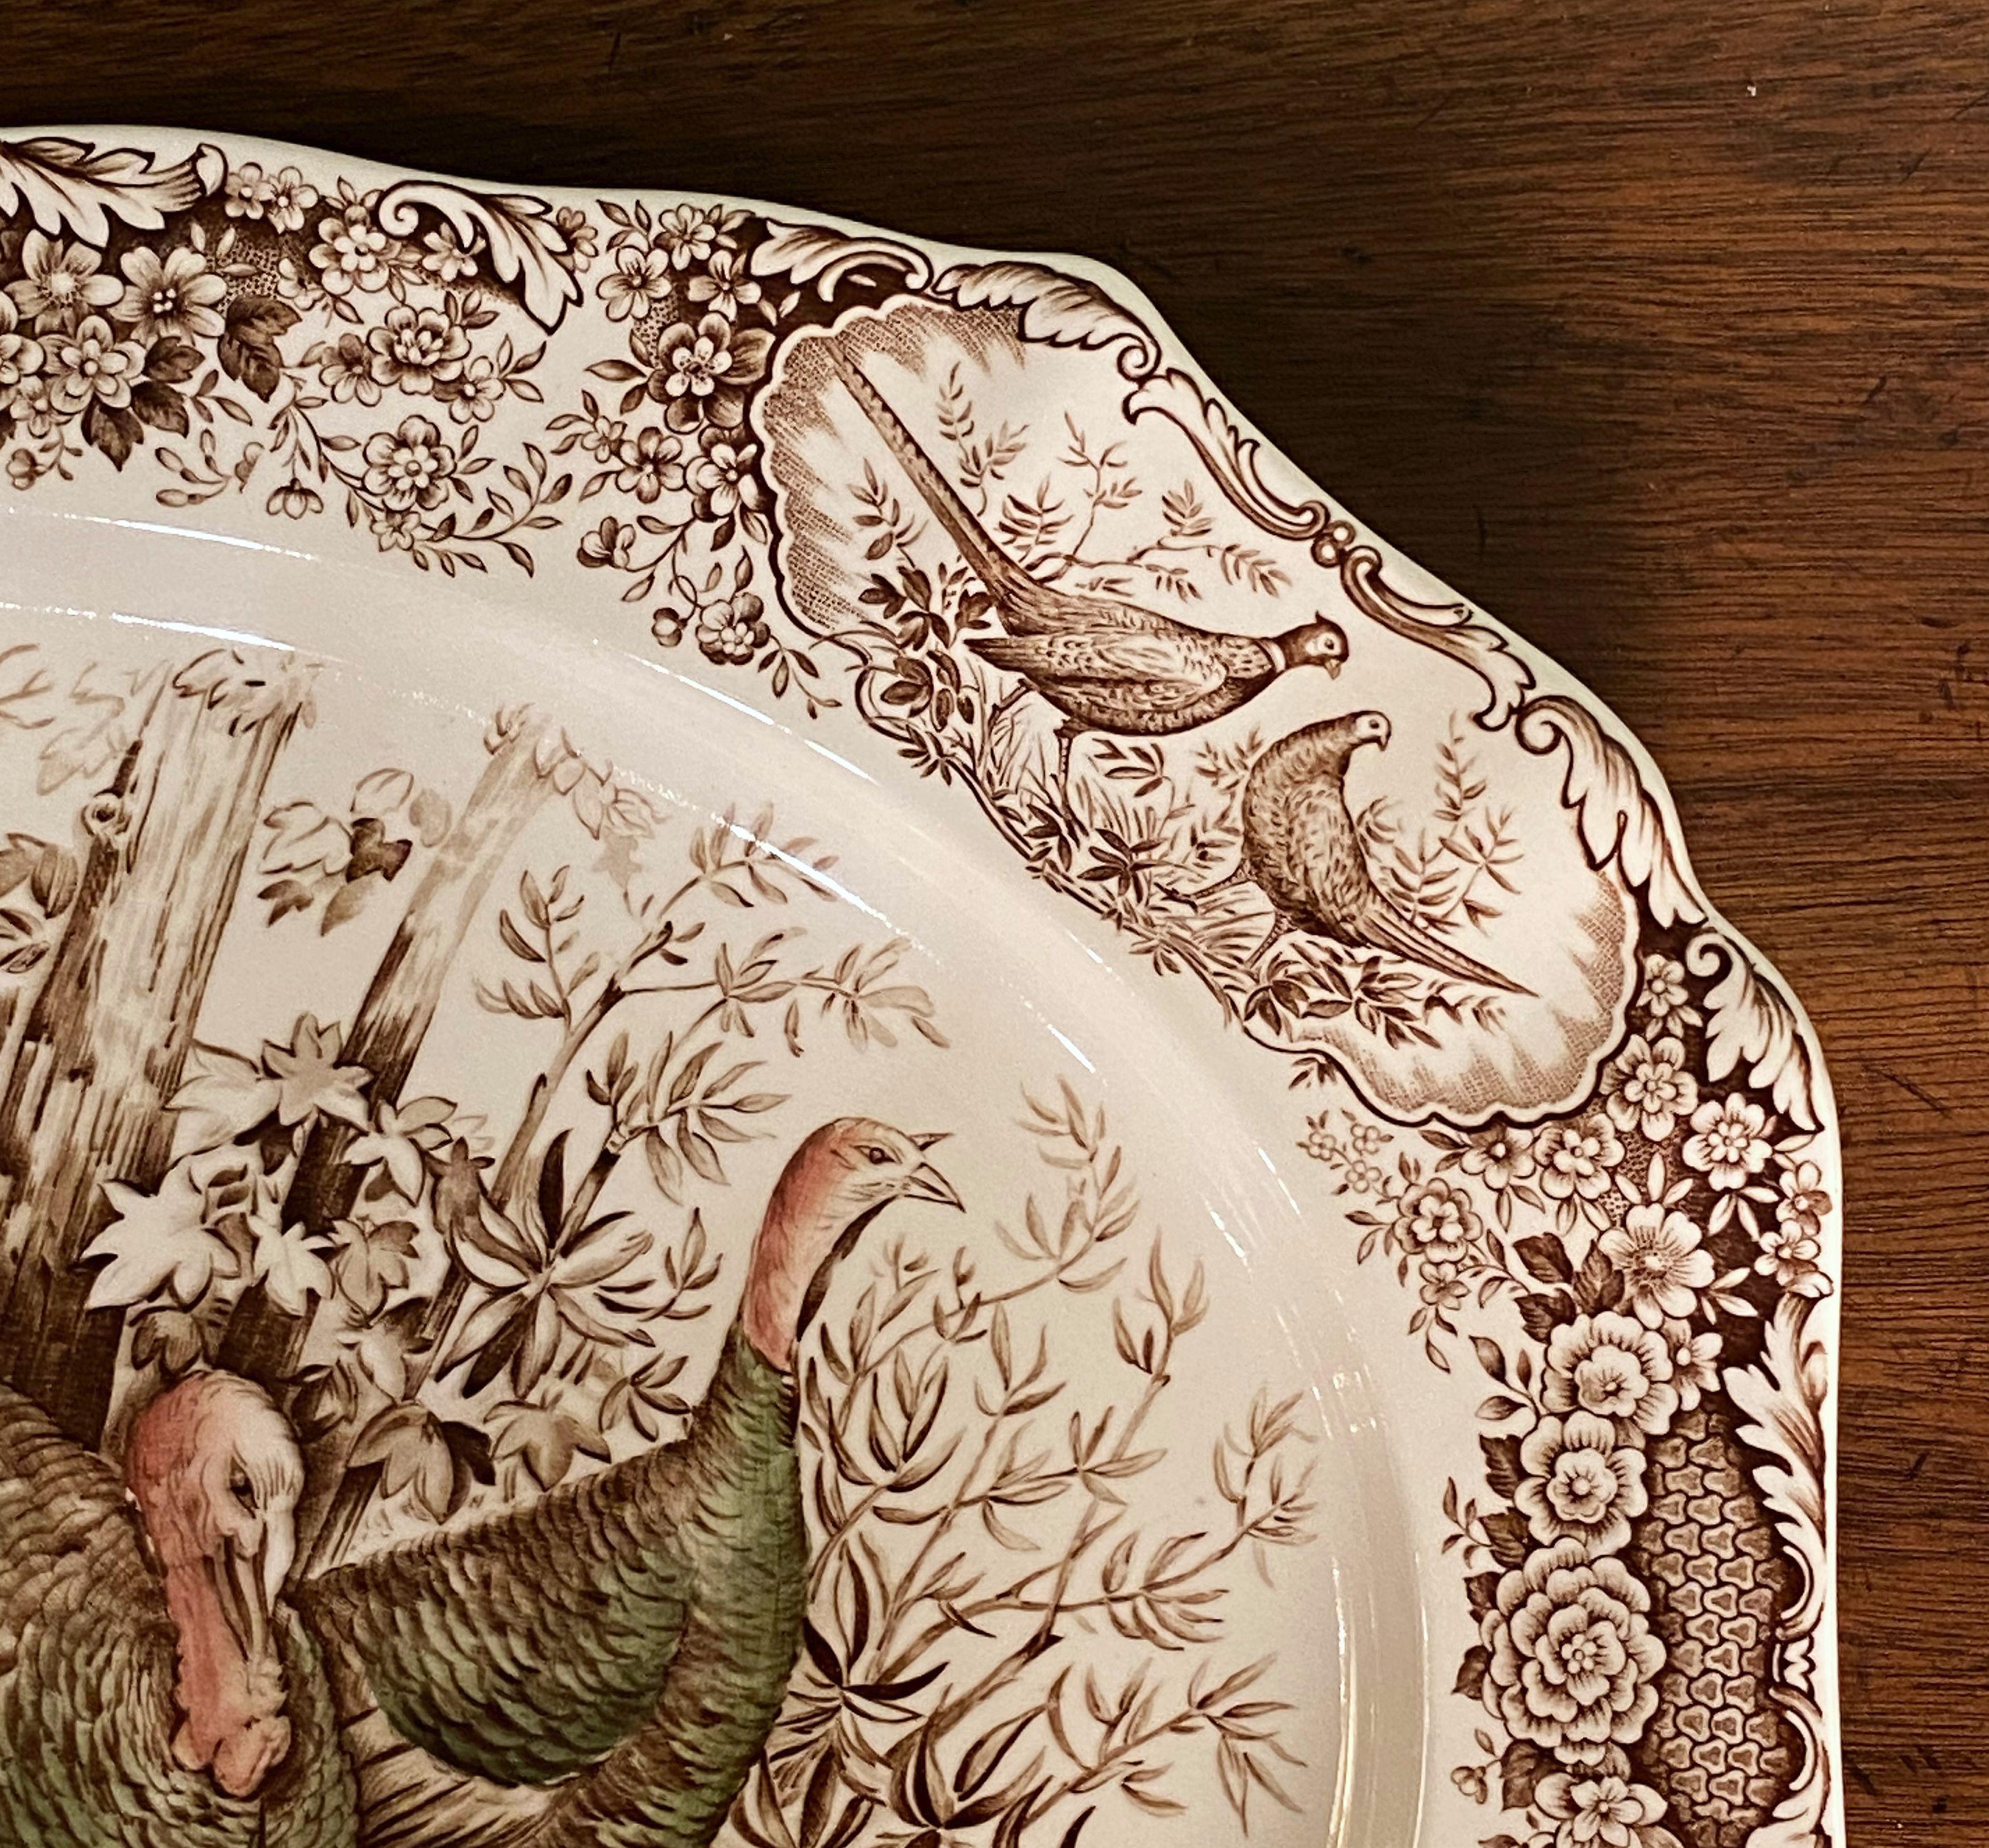 English Transferware Large Turkey Platter, Native American by Johnson Brothers In Good Condition For Sale In Austin, TX